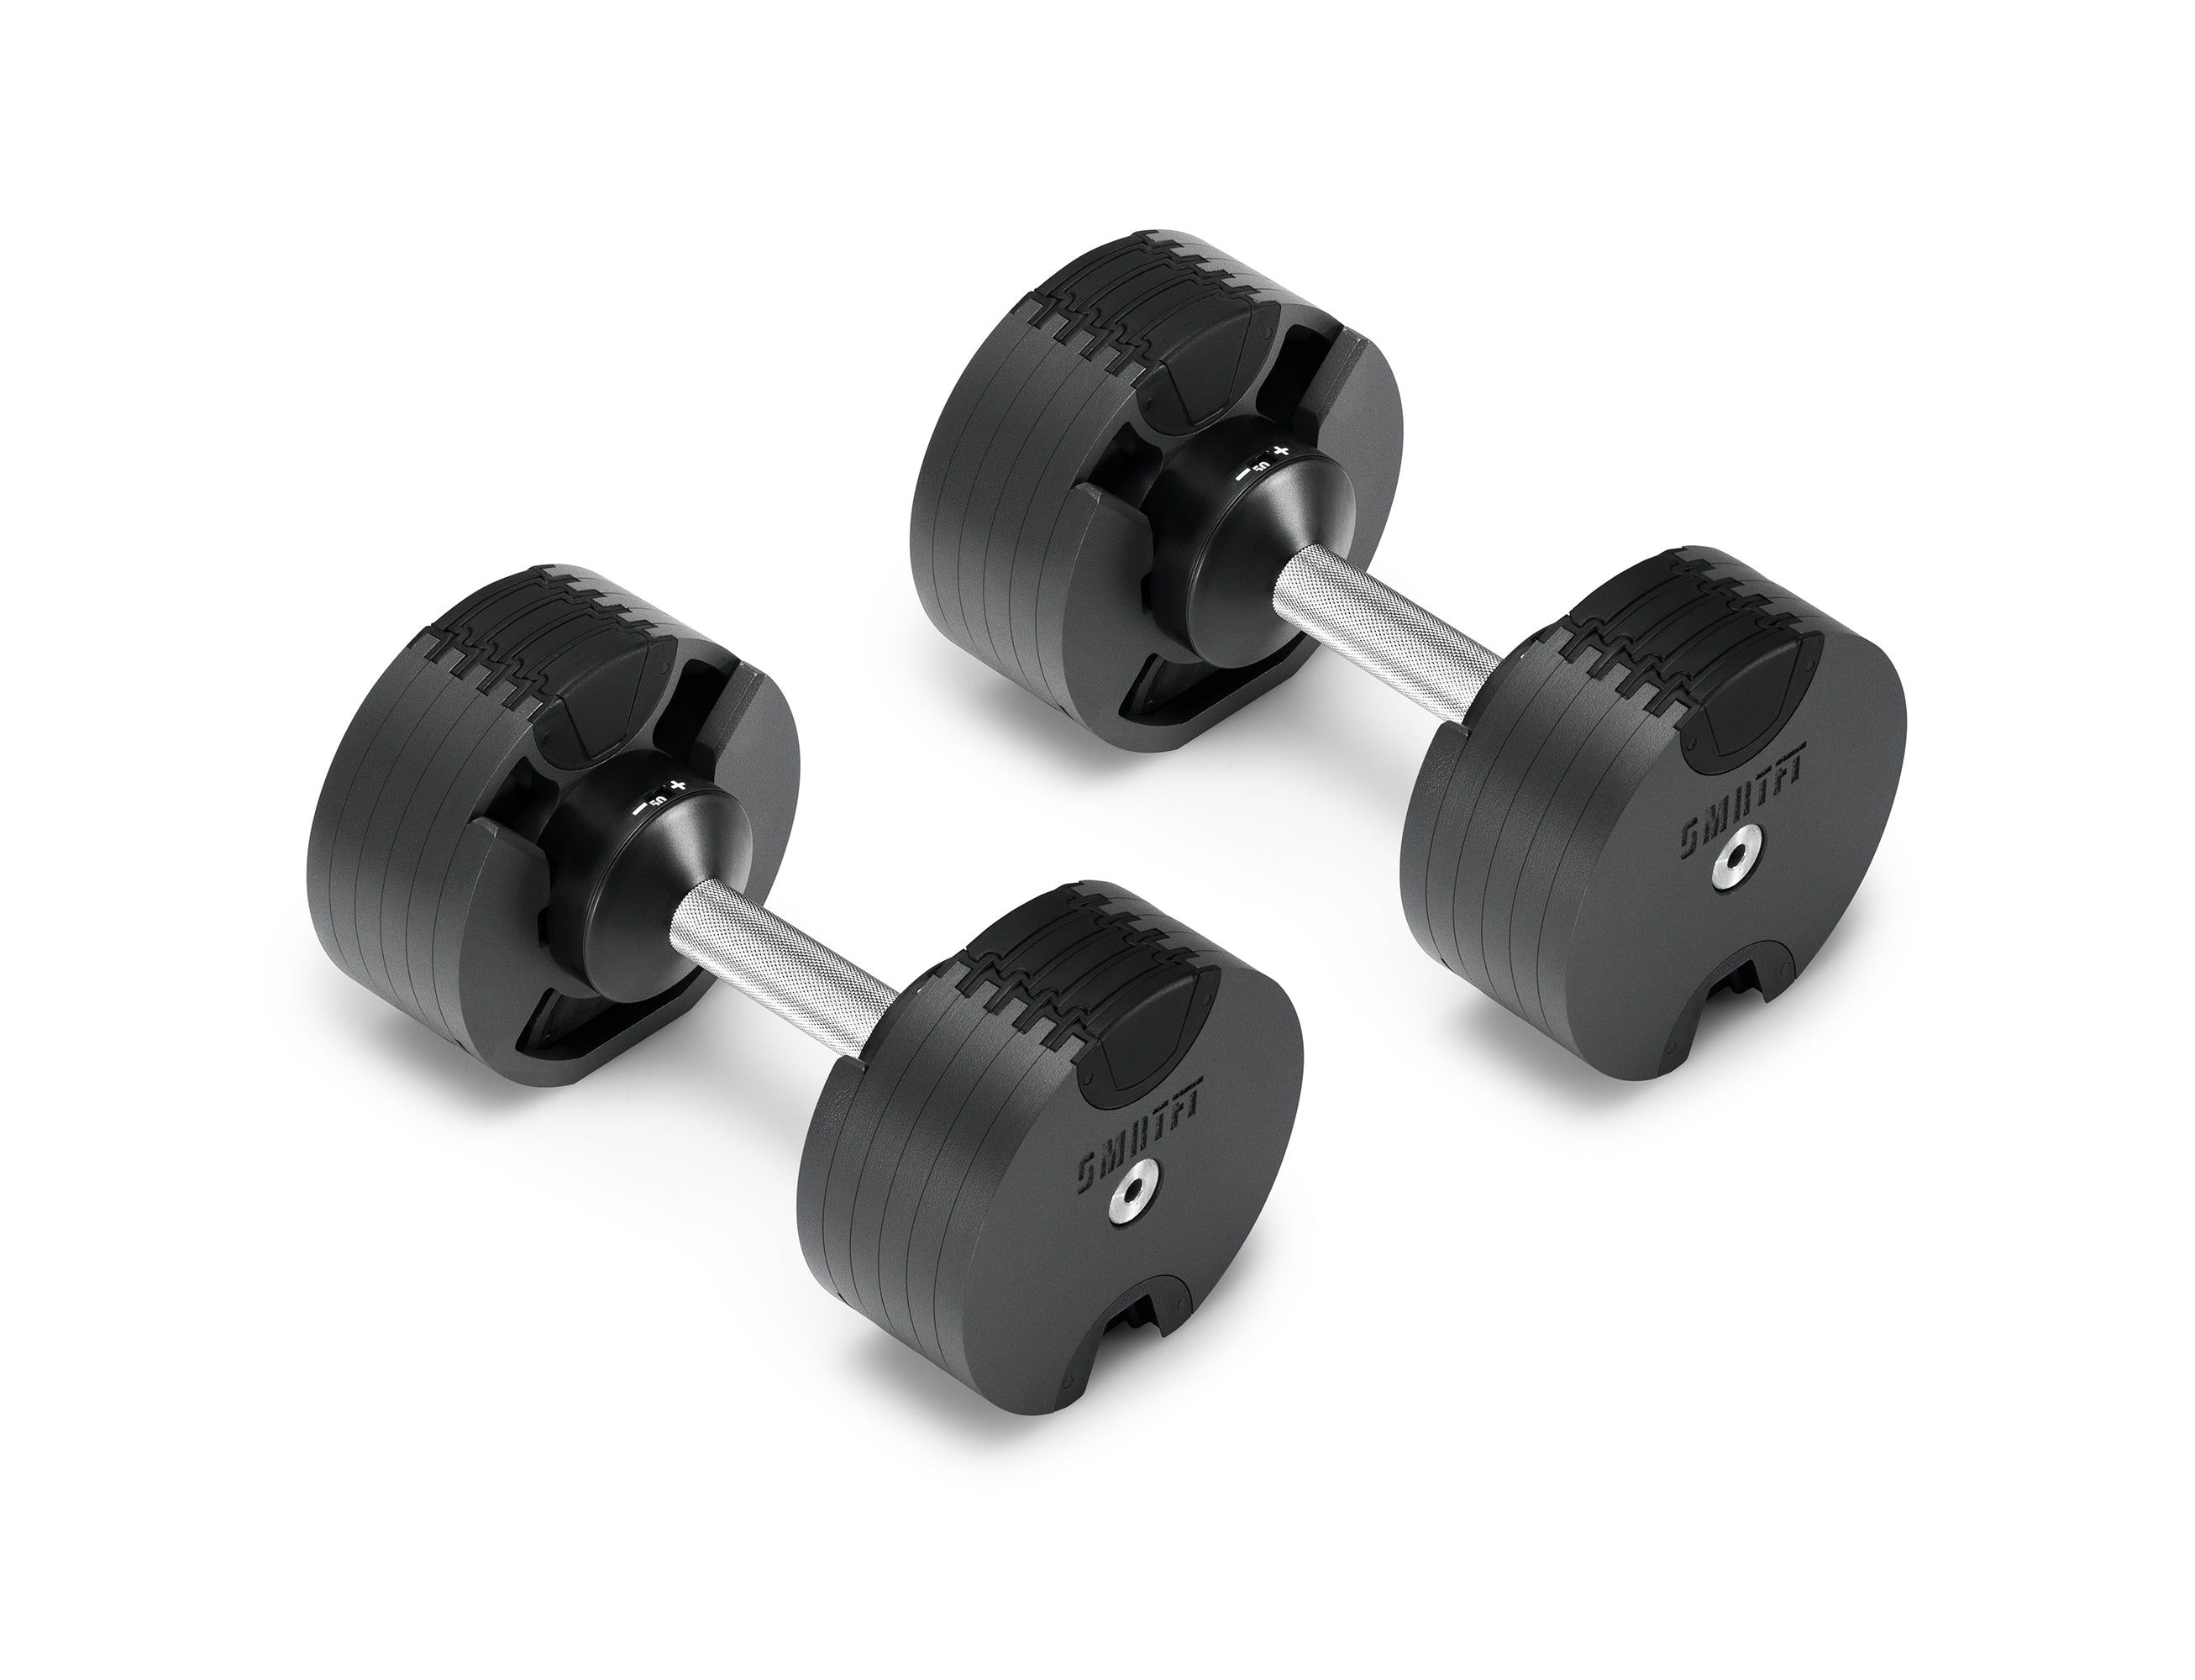 dumbbell sets ab workout dumbbell weights workout equipment for men workout  stuff heavy hand weights 50 lb adjustable dumbbell set